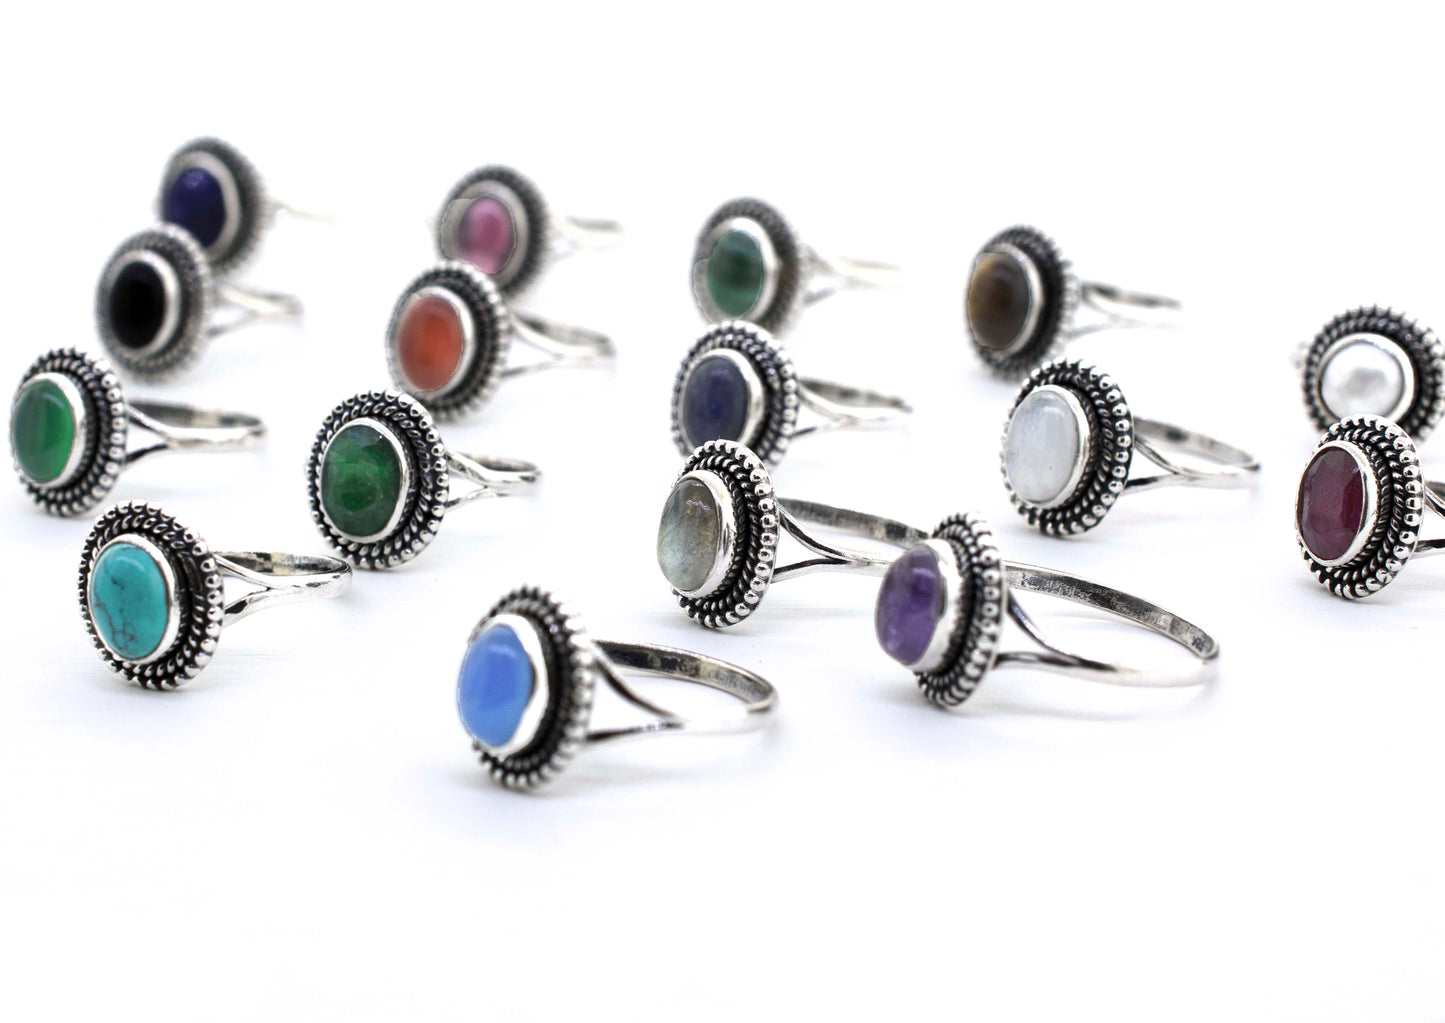 A group of Gemstone Oval Shield Rings with beautifully colored cabochon stones.